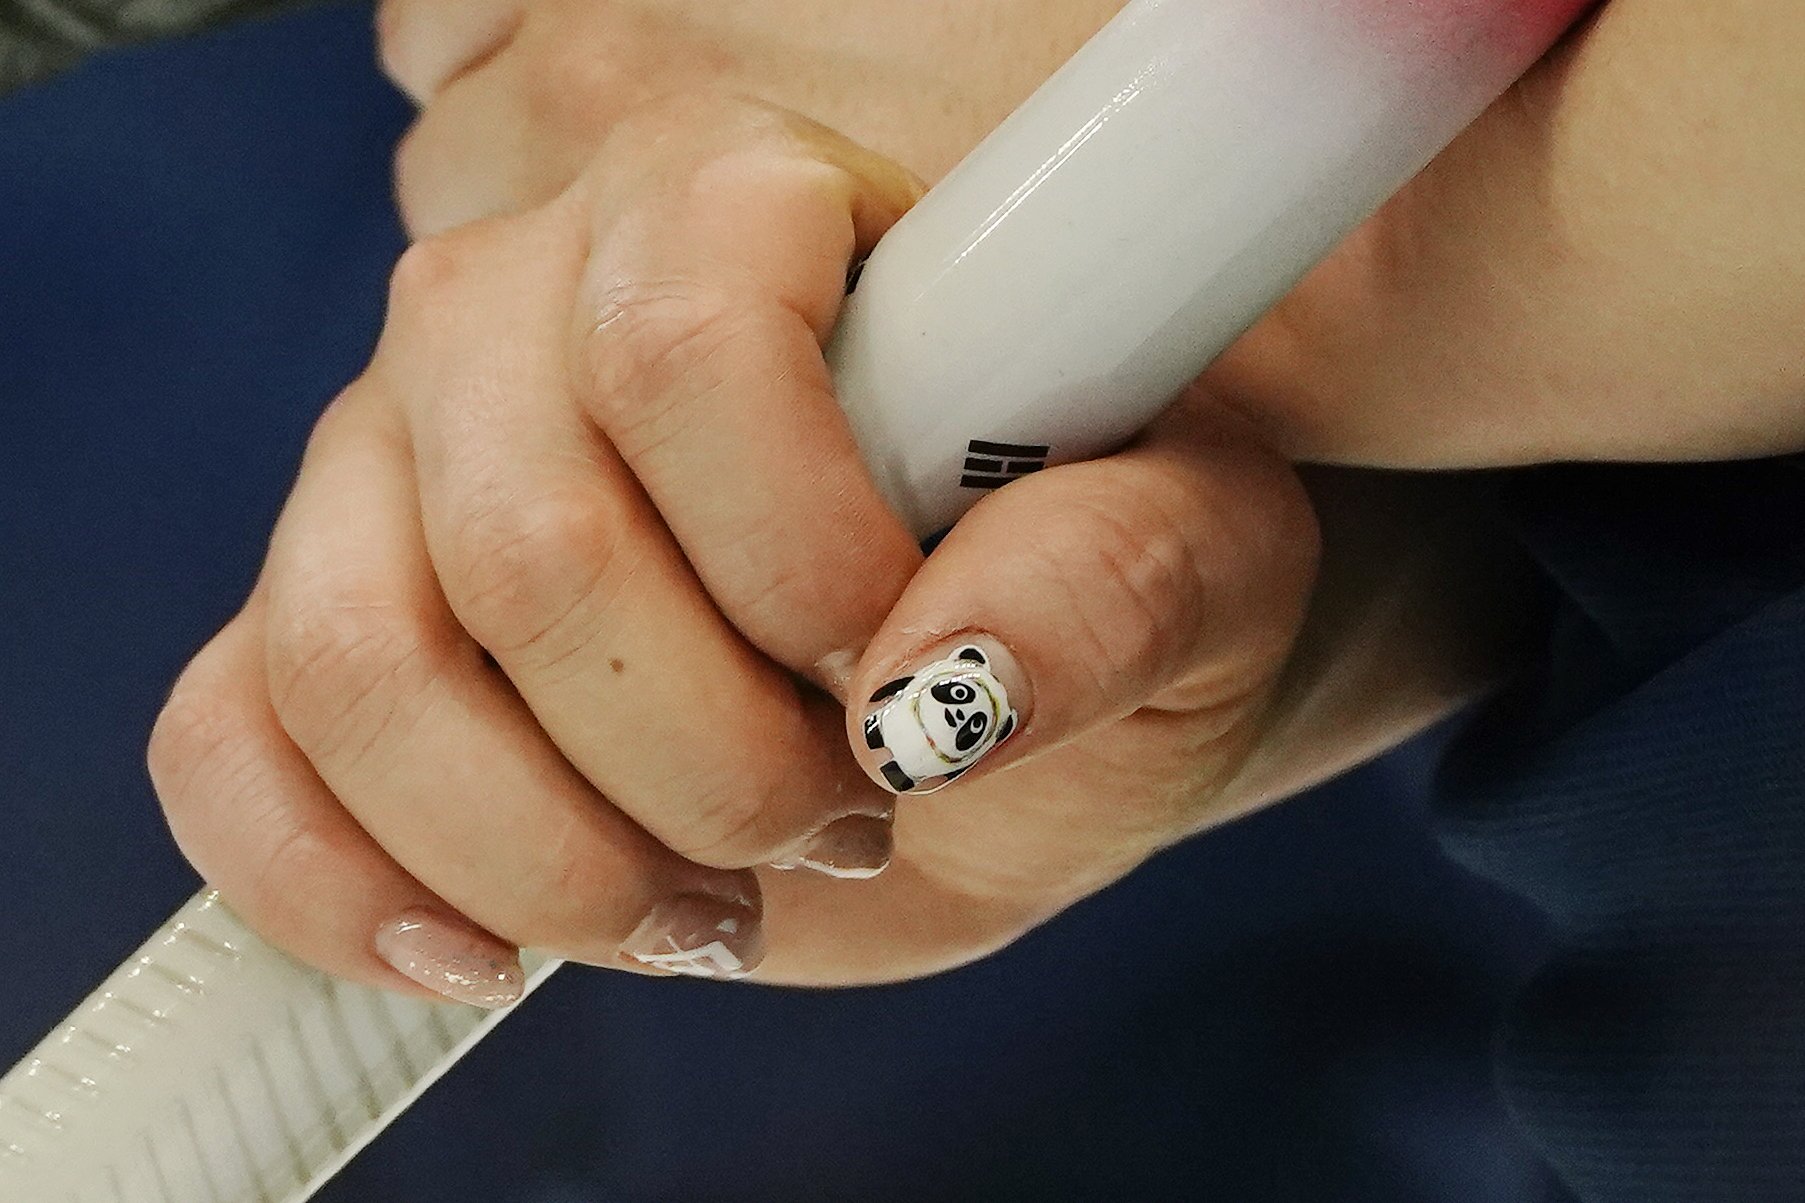  South Korea's Kim Kyeong-ae has Bing Dwen Dwen, the Olympics mascot, on her nails during a women's curling match against Britain at the Beijing Winter Olympics Friday, Feb. 11, 2022, in Beijing. (AP Photo/Brynn Anderson) 